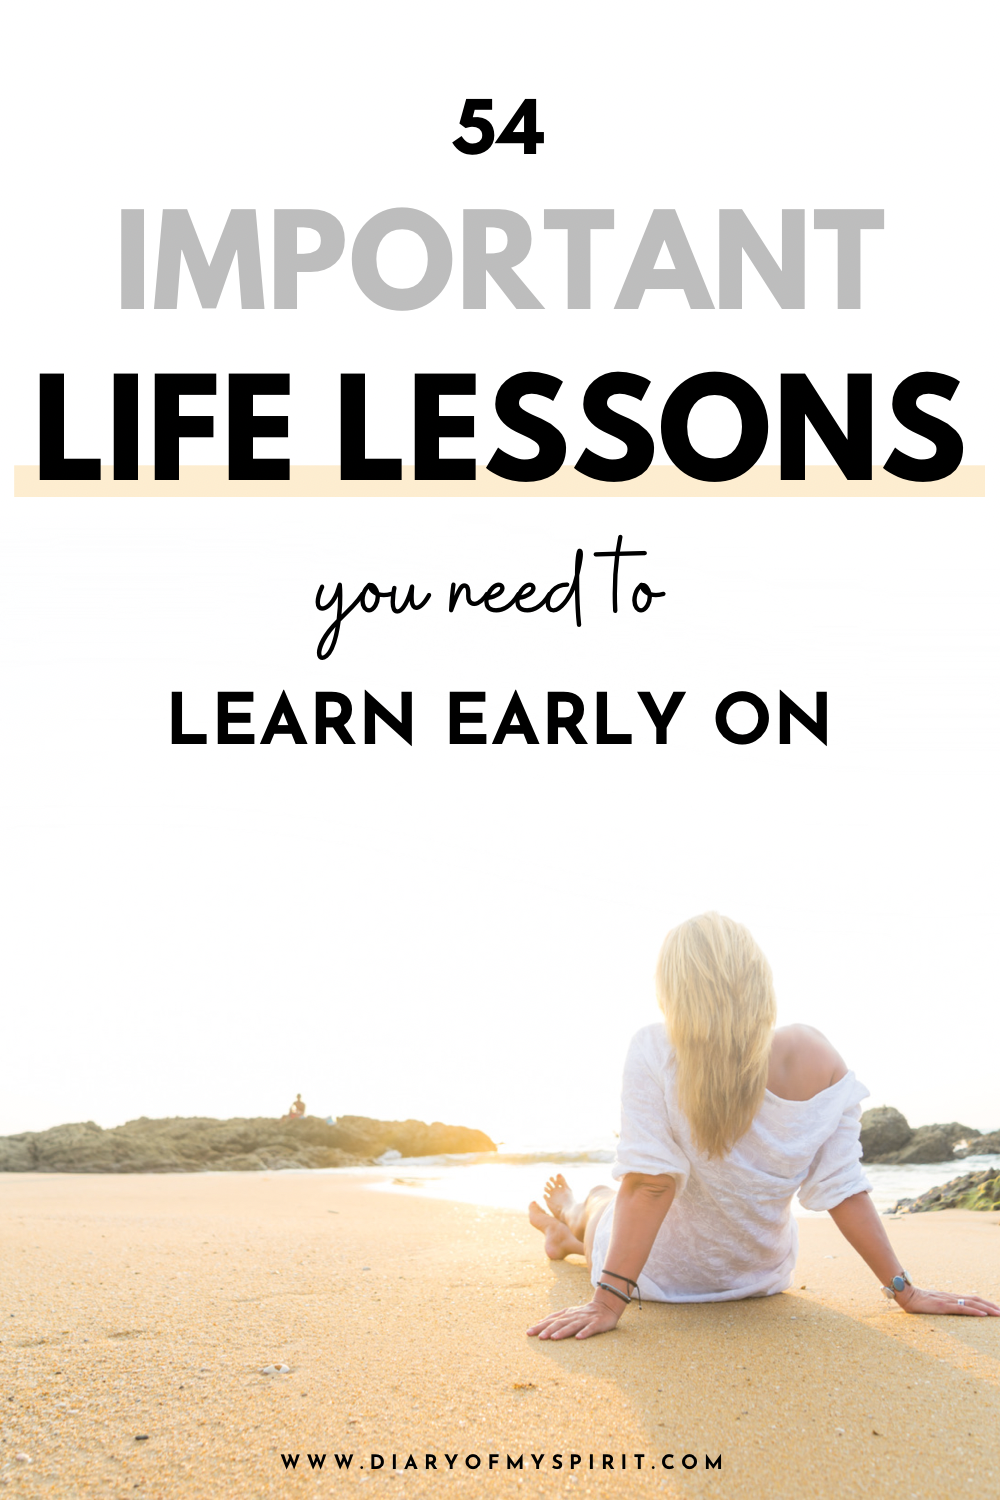 Important life lessons to learn straight away. best life lessons. good lessons in life. life lessons quotes. life lessons to enrich your life. life lessons to help your personal development and growth